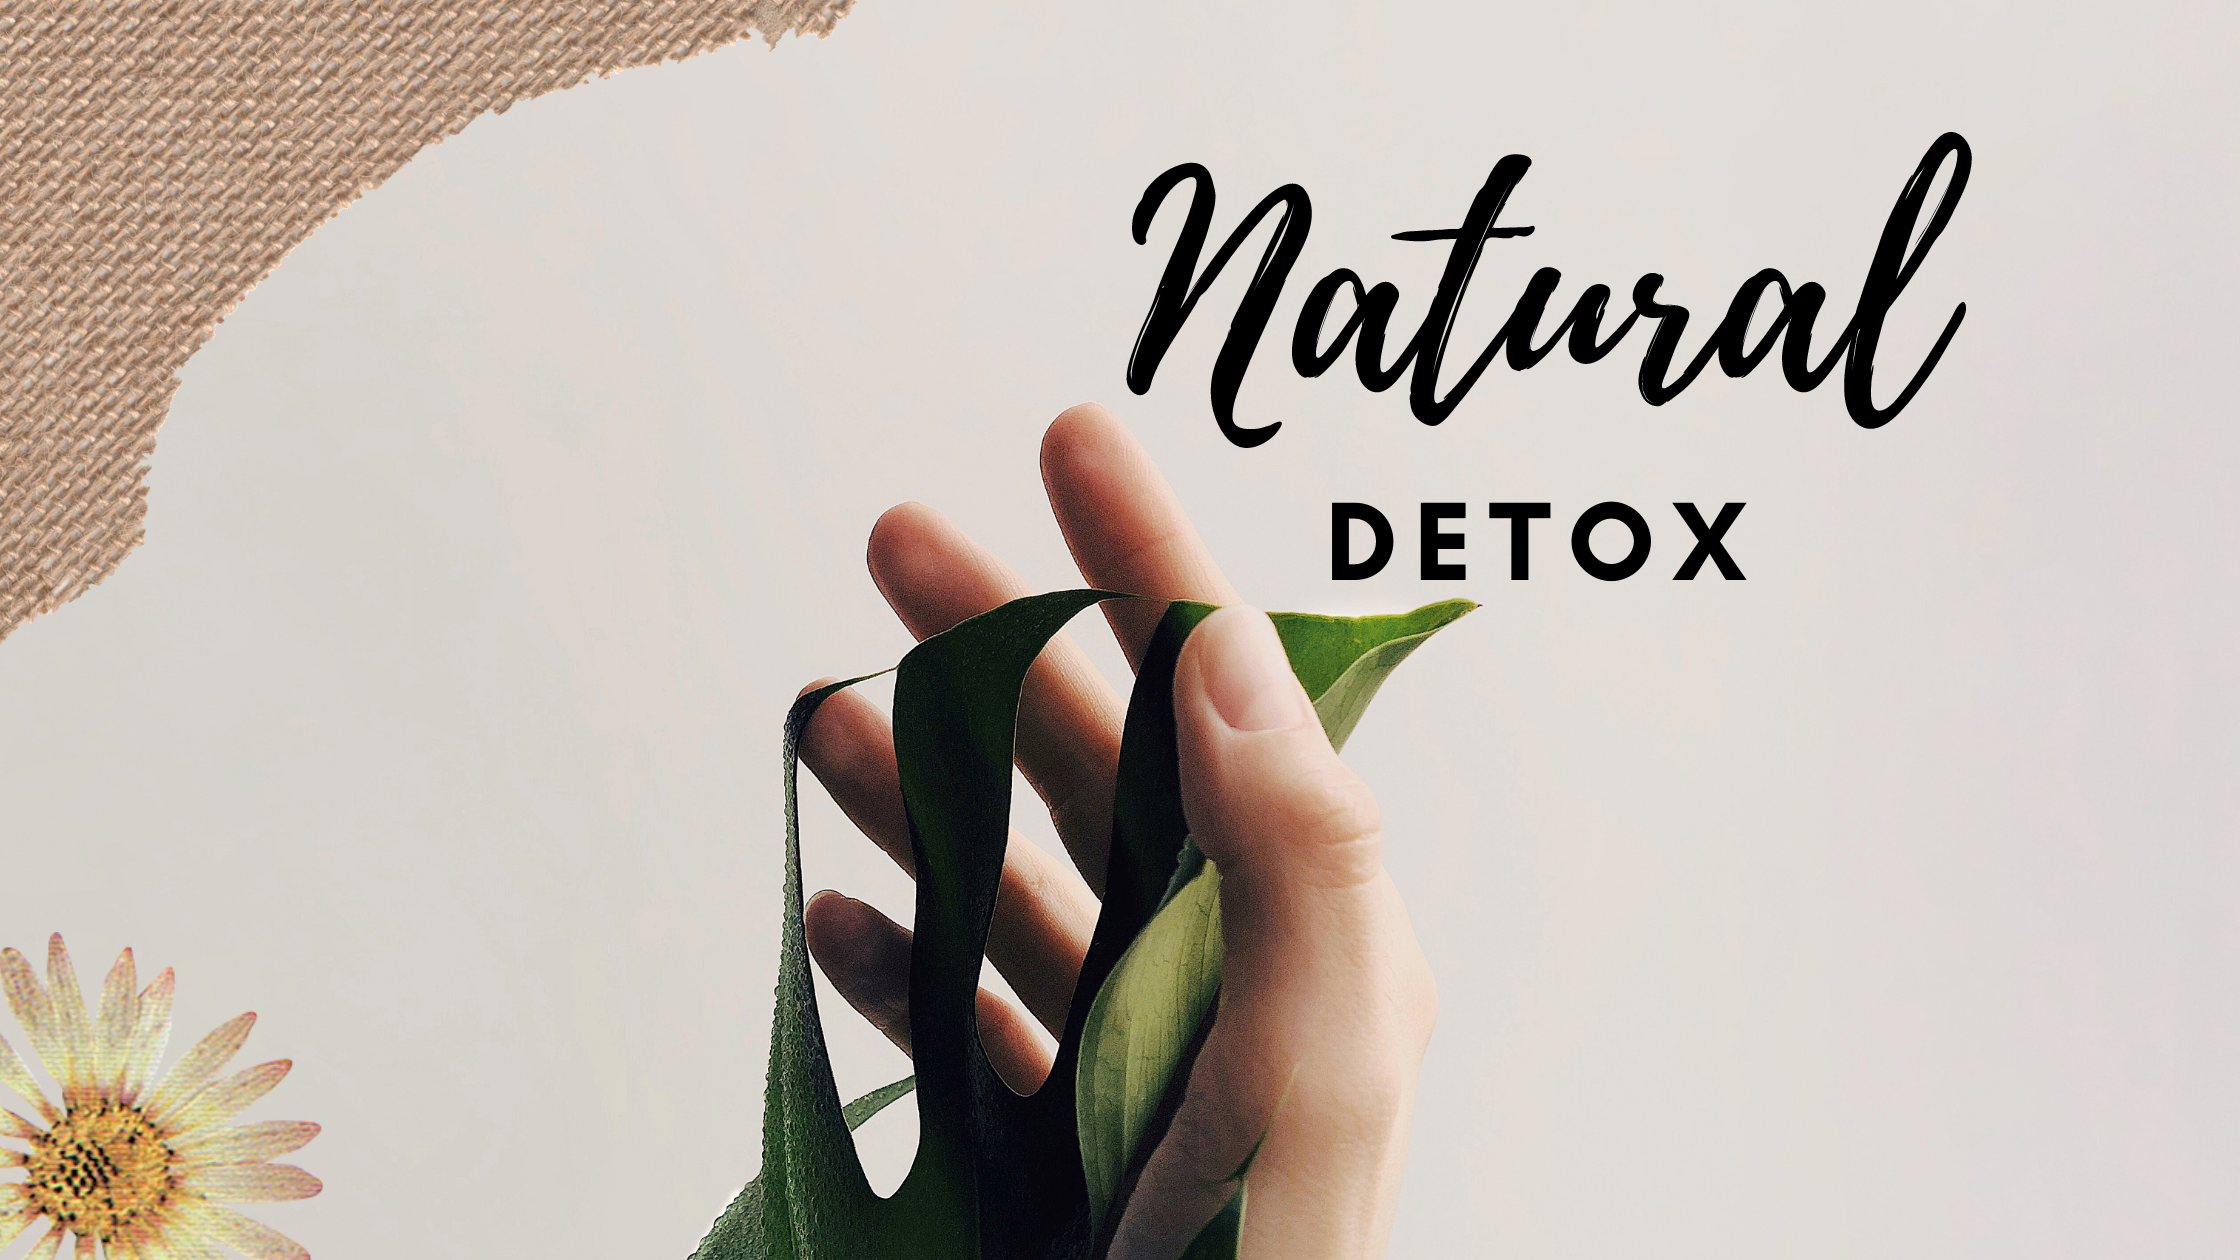 Detox Your Way To Better Health